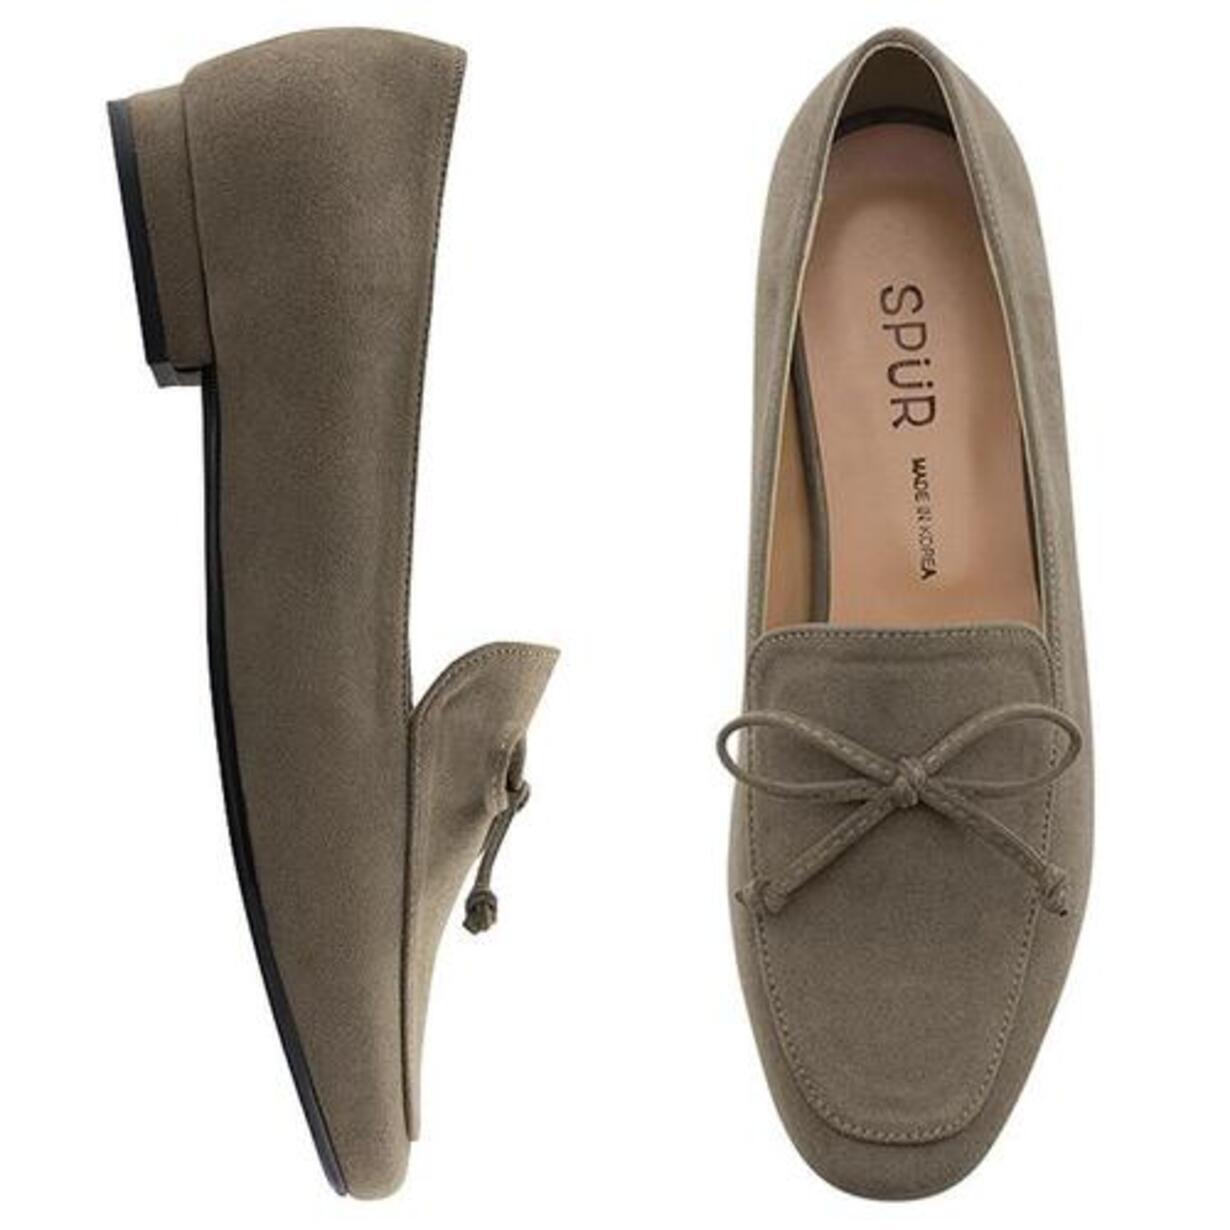 SPUR[스퍼]Classic bow Loafer -OF7009 DI